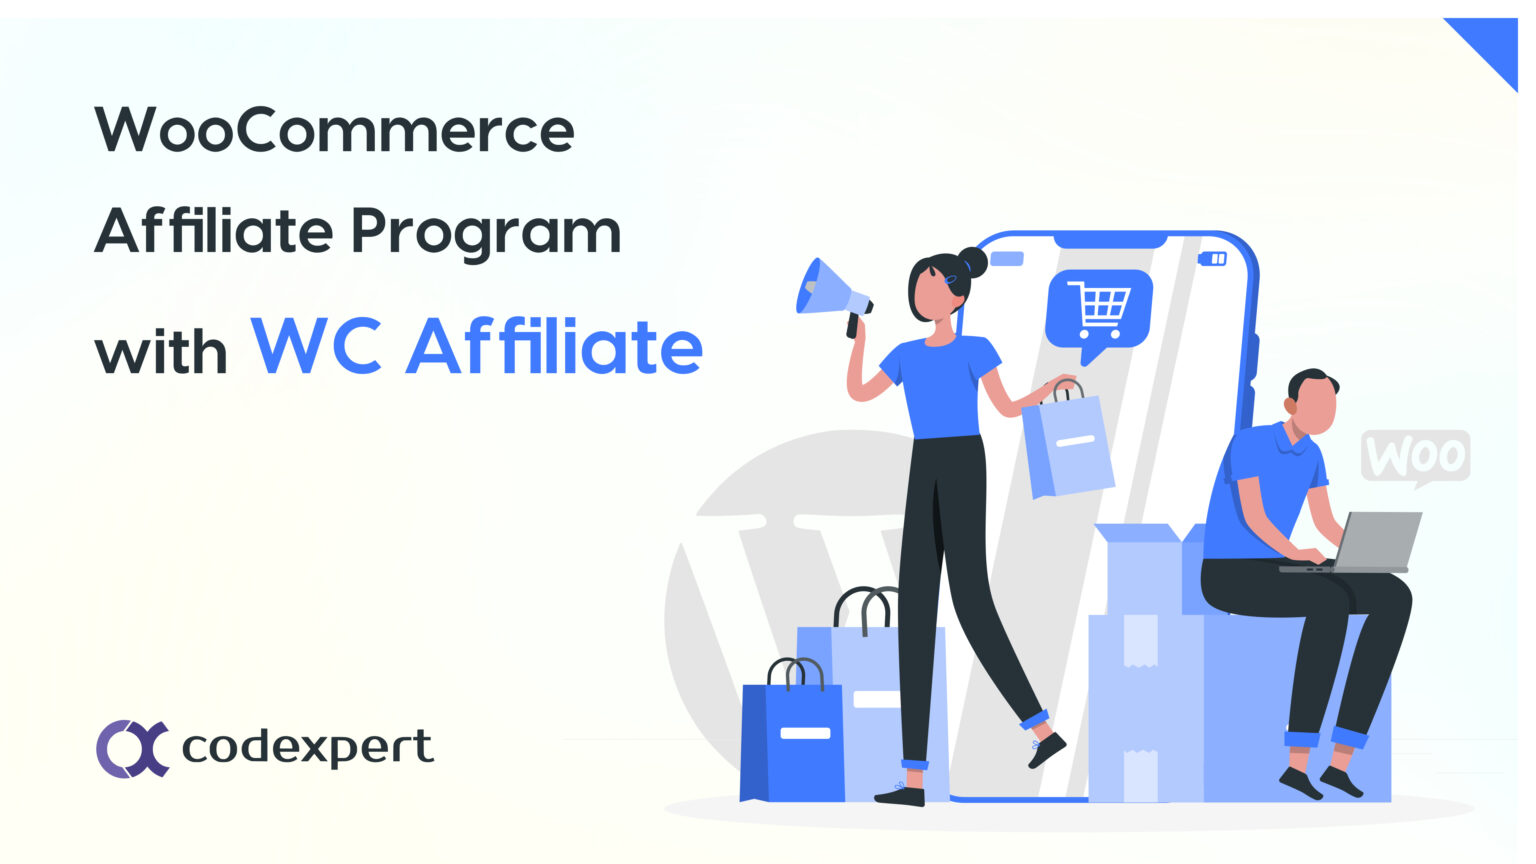 Launching A WooCommerce Affiliate Program With WC Affiliate